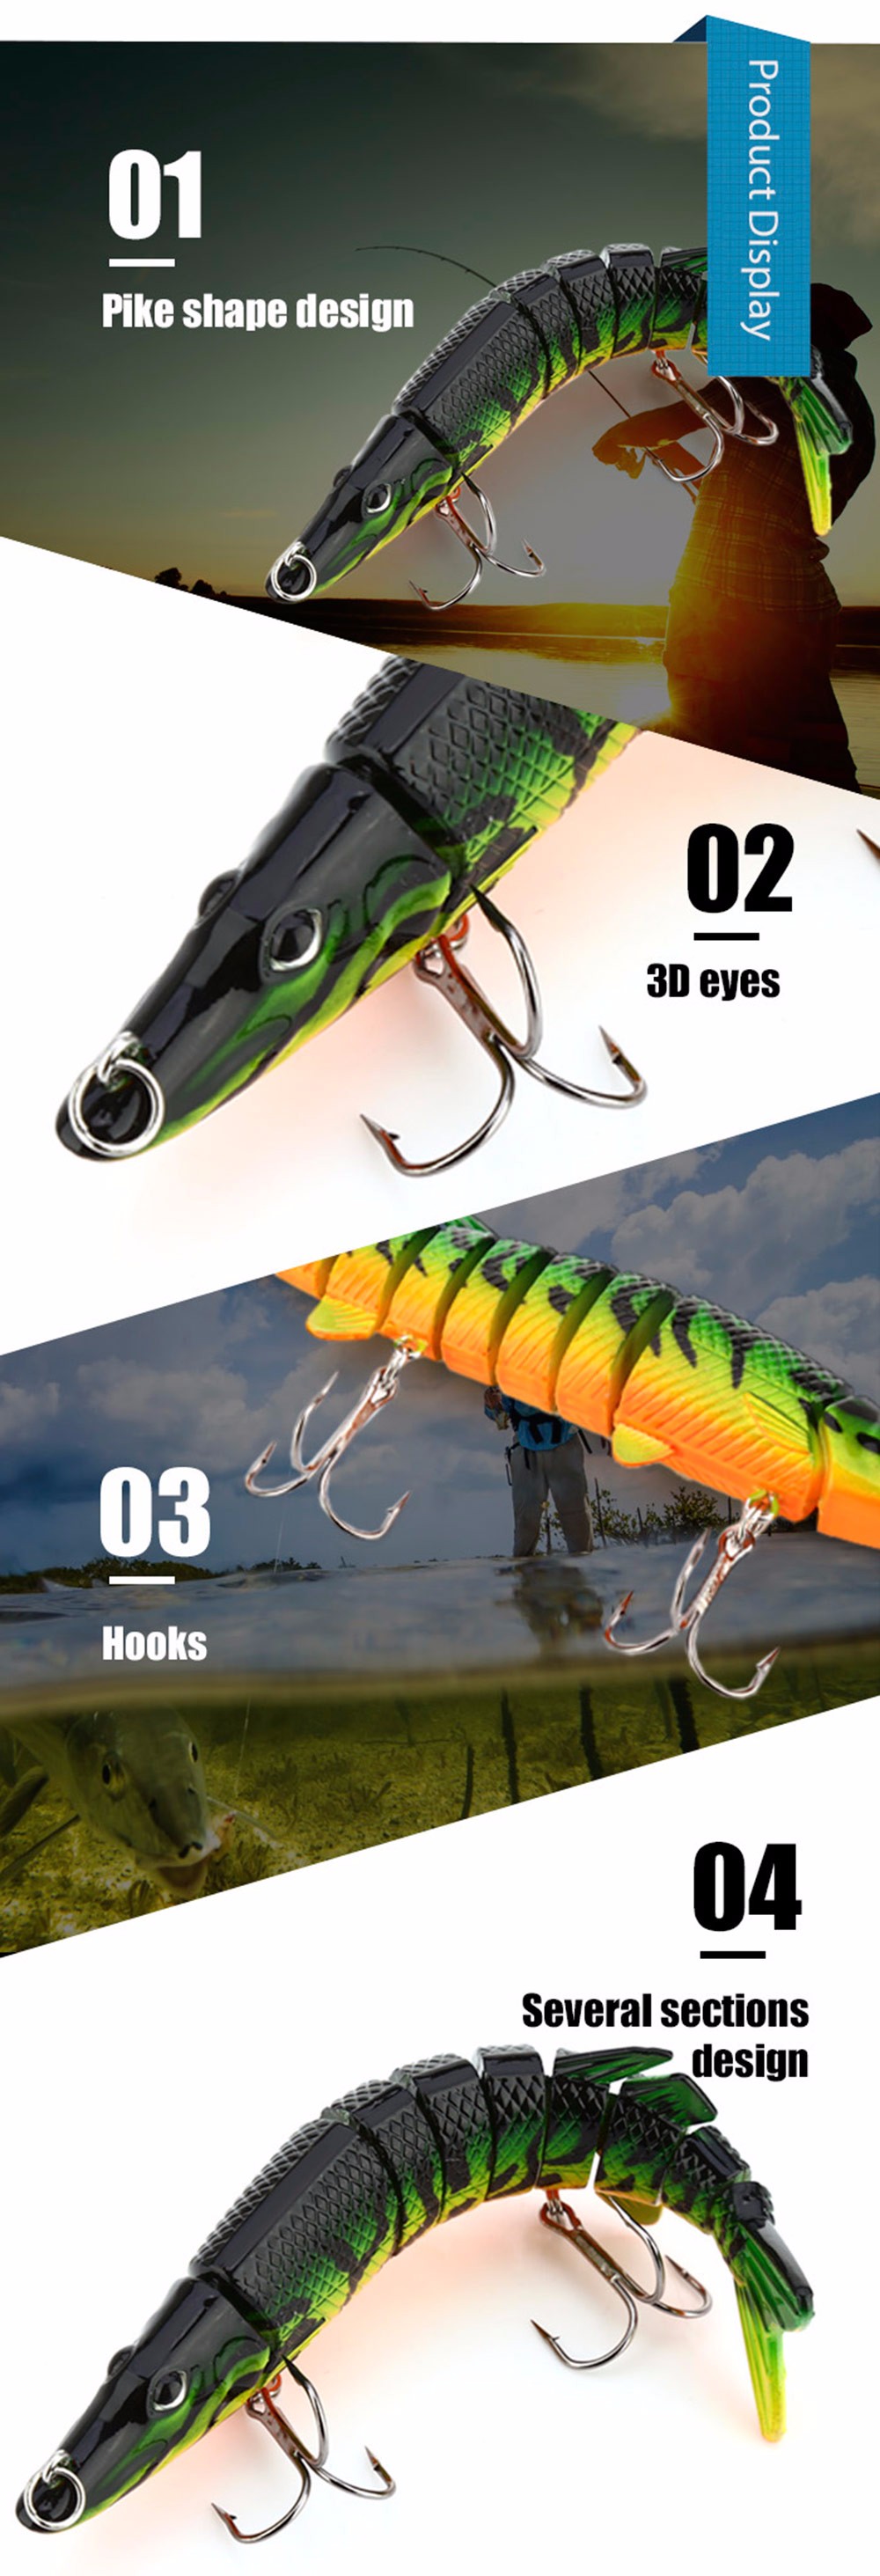 Proberos Artificial 9 Sections Pike Tackle Fishing Lure Crankbait